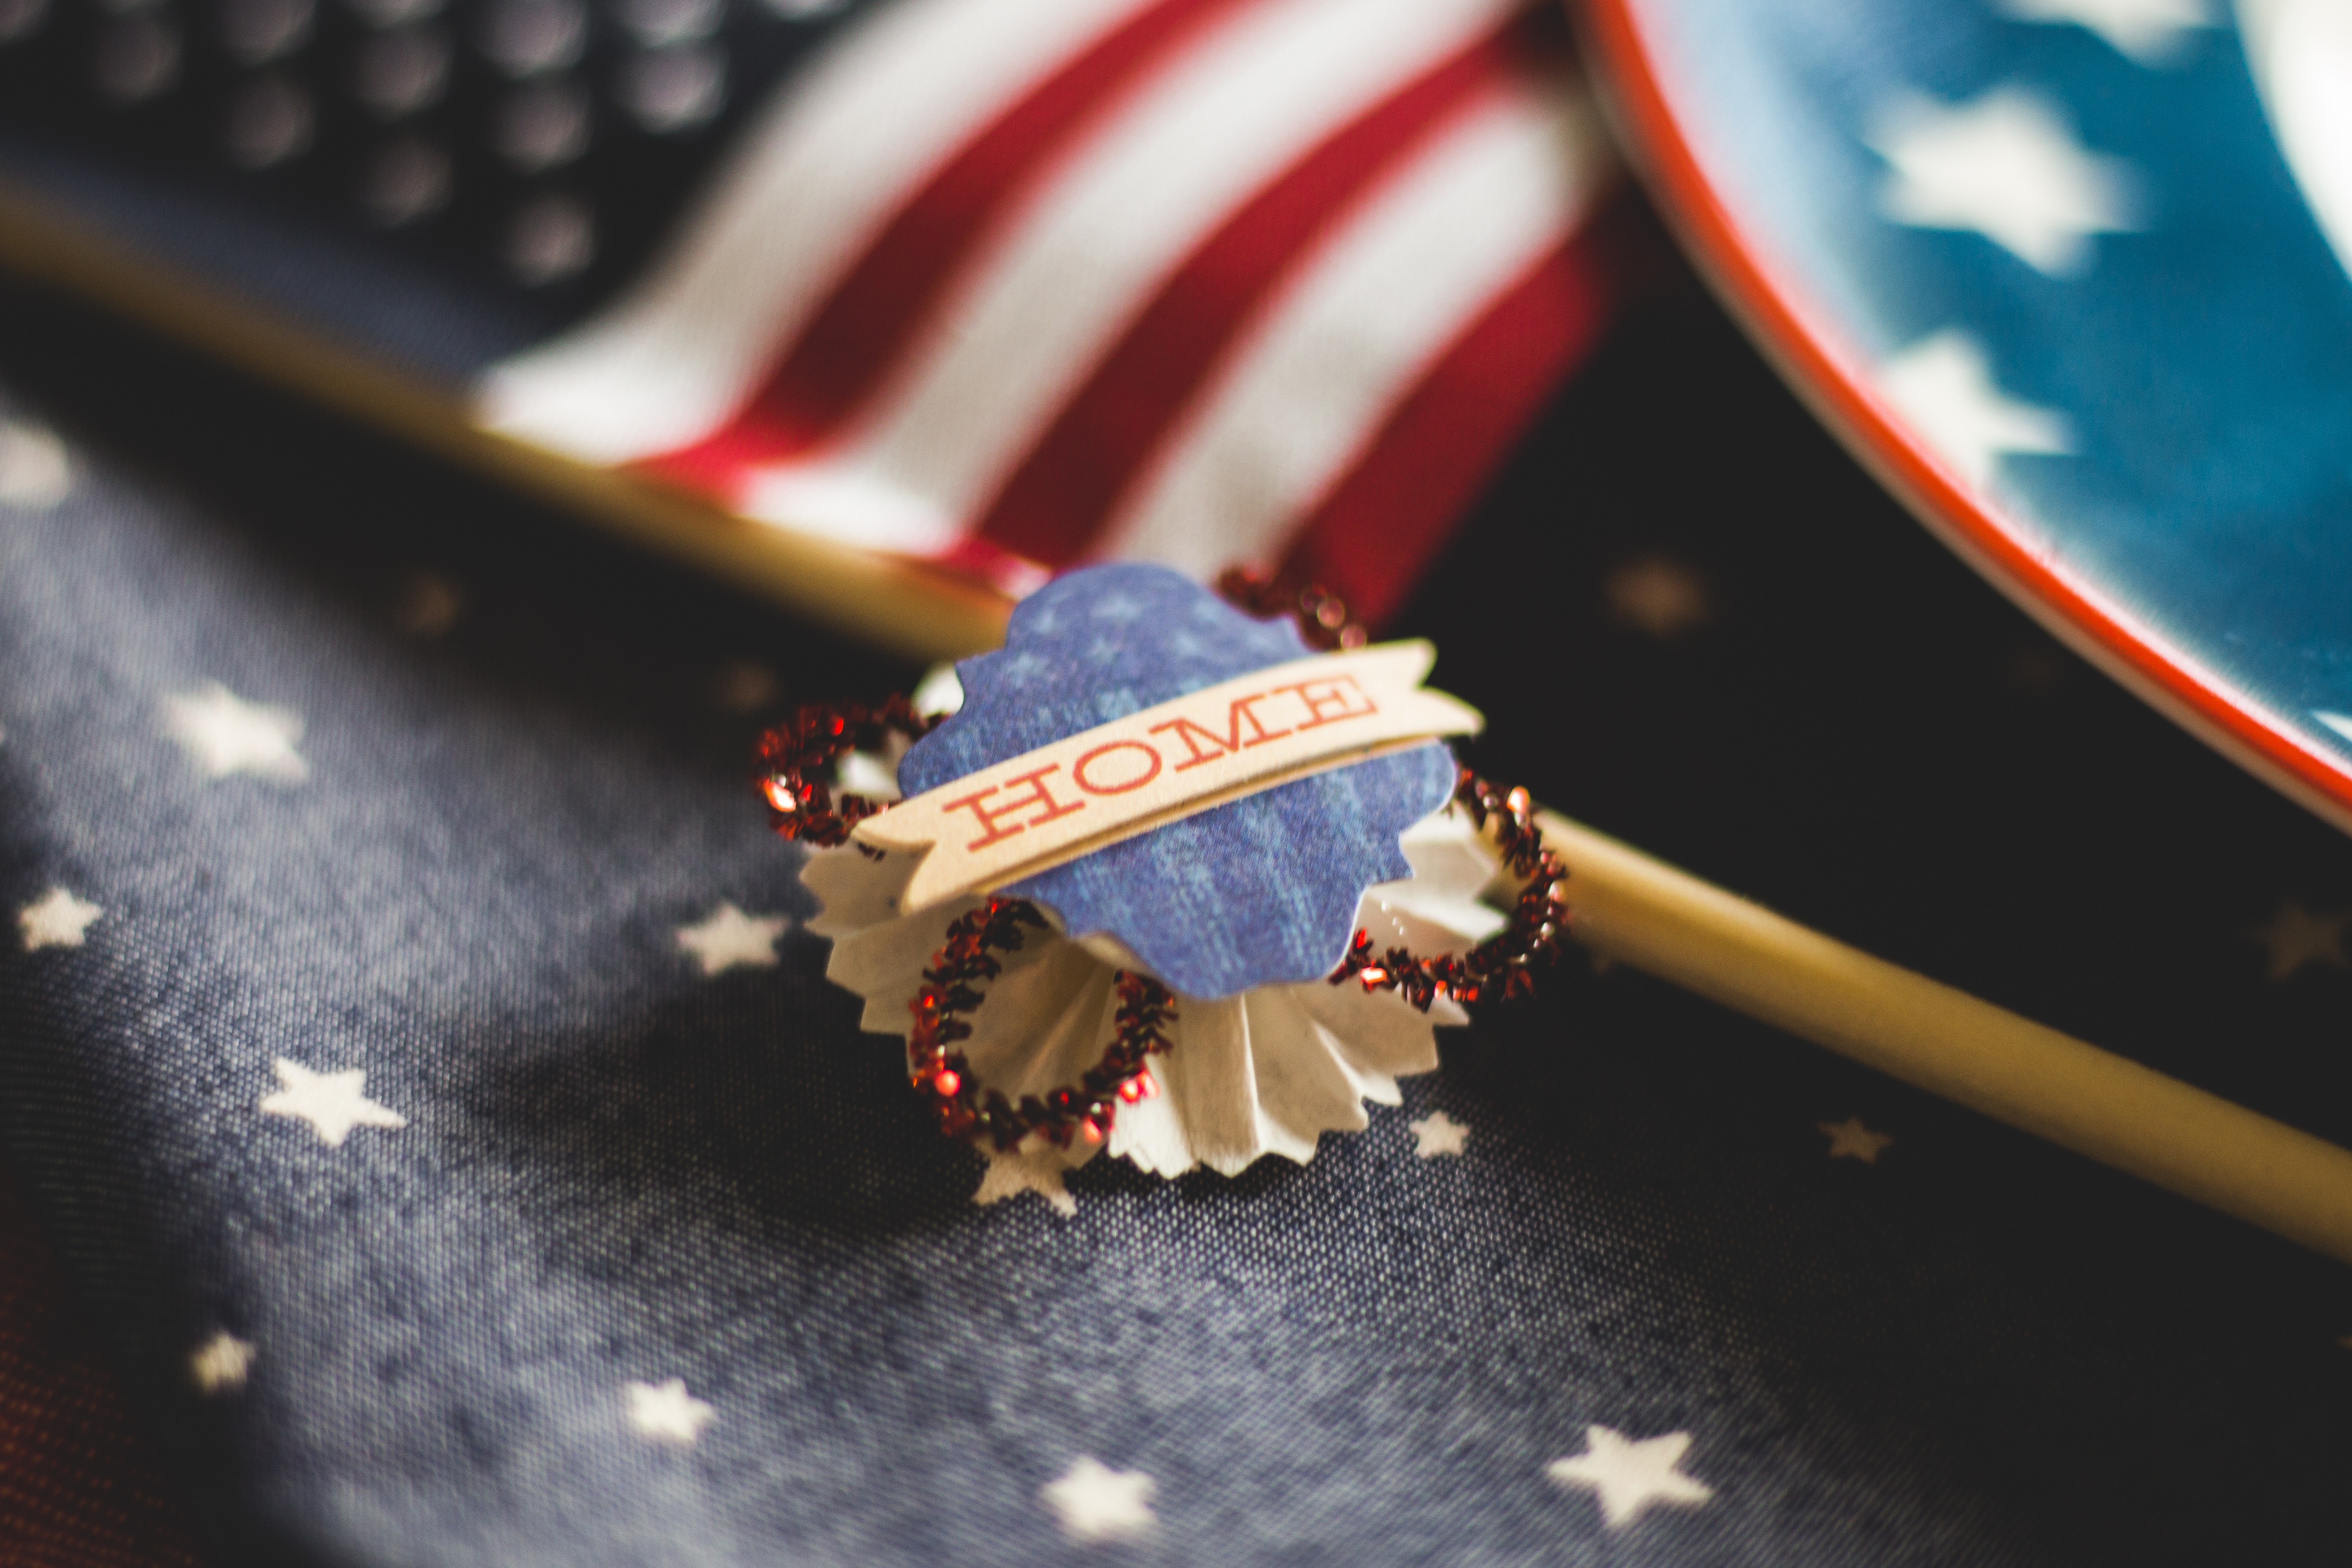 A button badge that says "home", lying on top of an American flag.